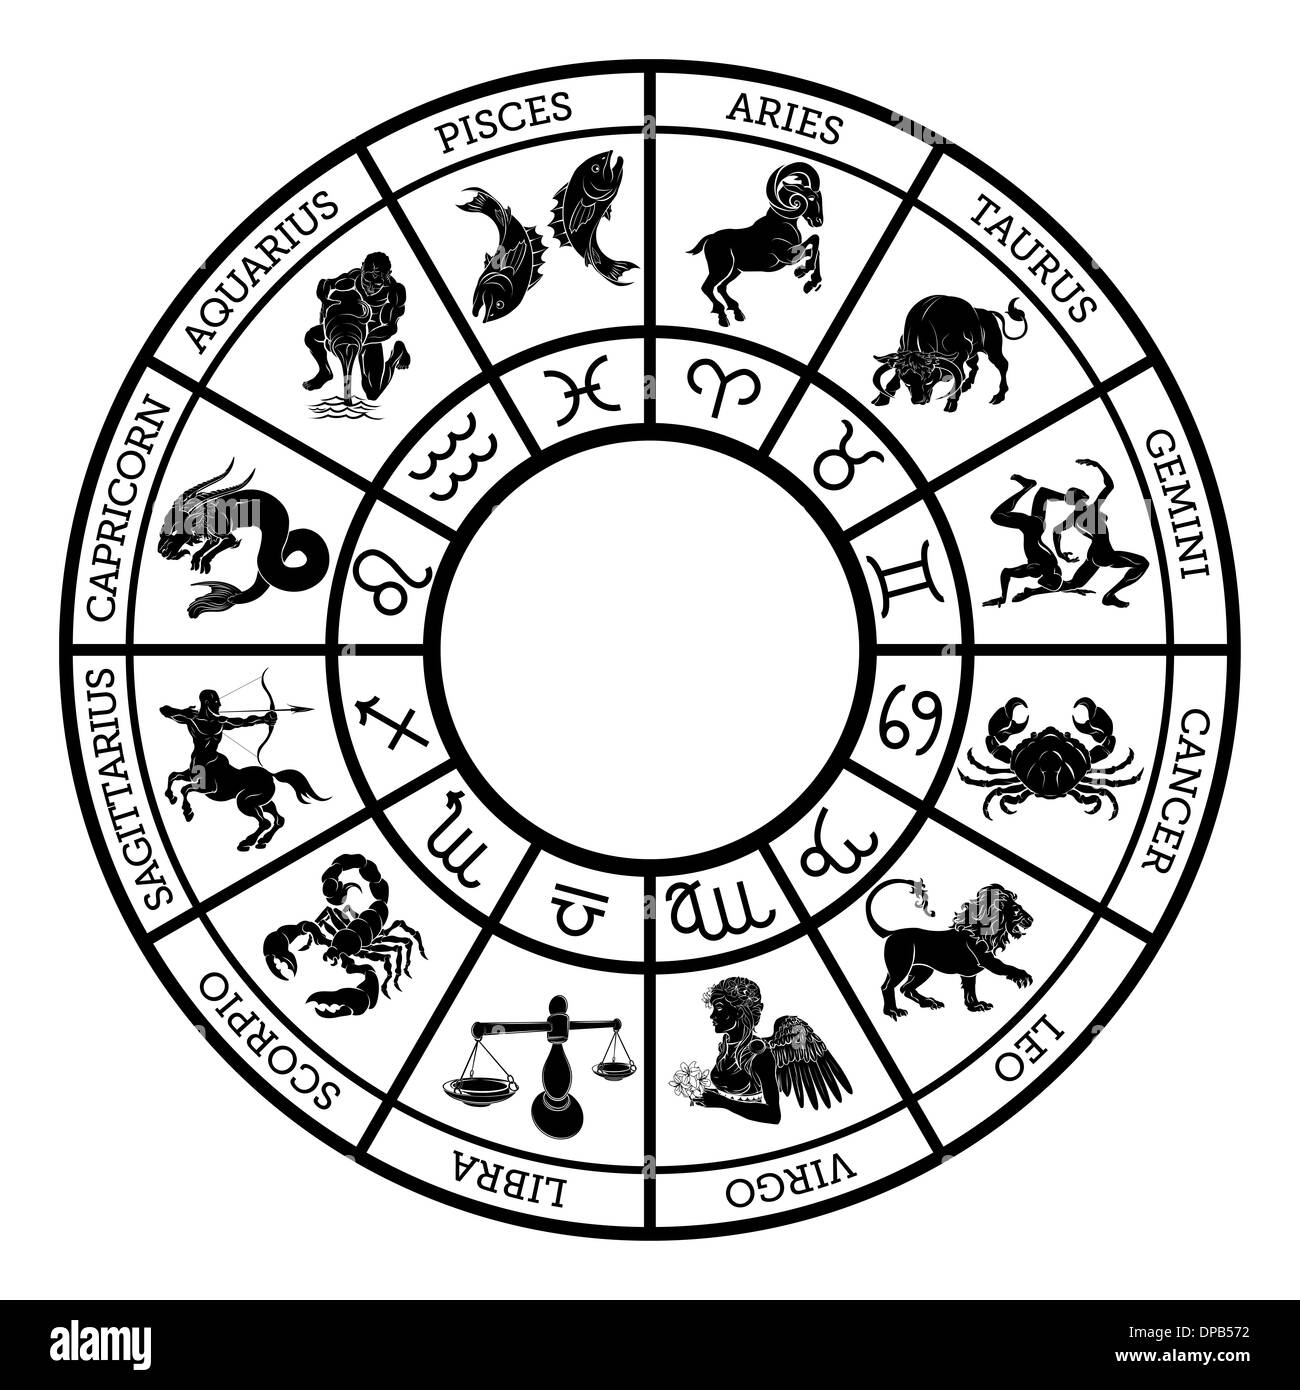 Zodiac sign icons representing the twelve signs of the zodiac for horoscopes arranged round in a circle Stock Photo